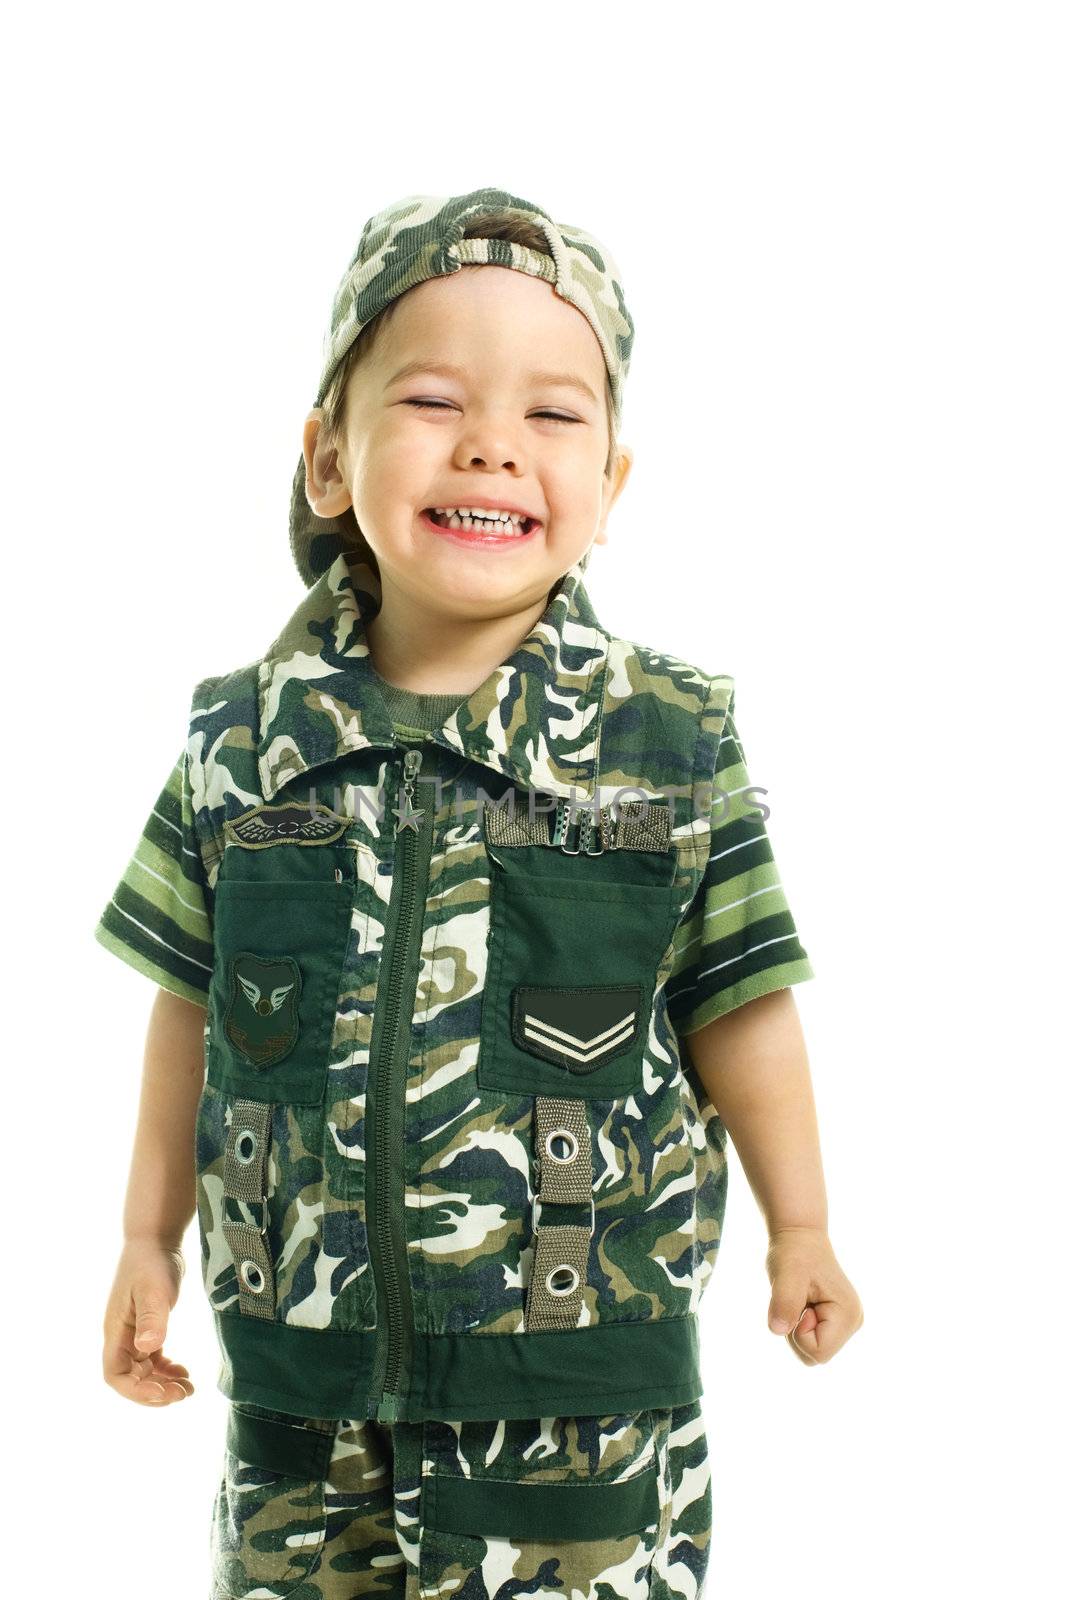 portrait of a cute excited three year old boy dressed in camouflage